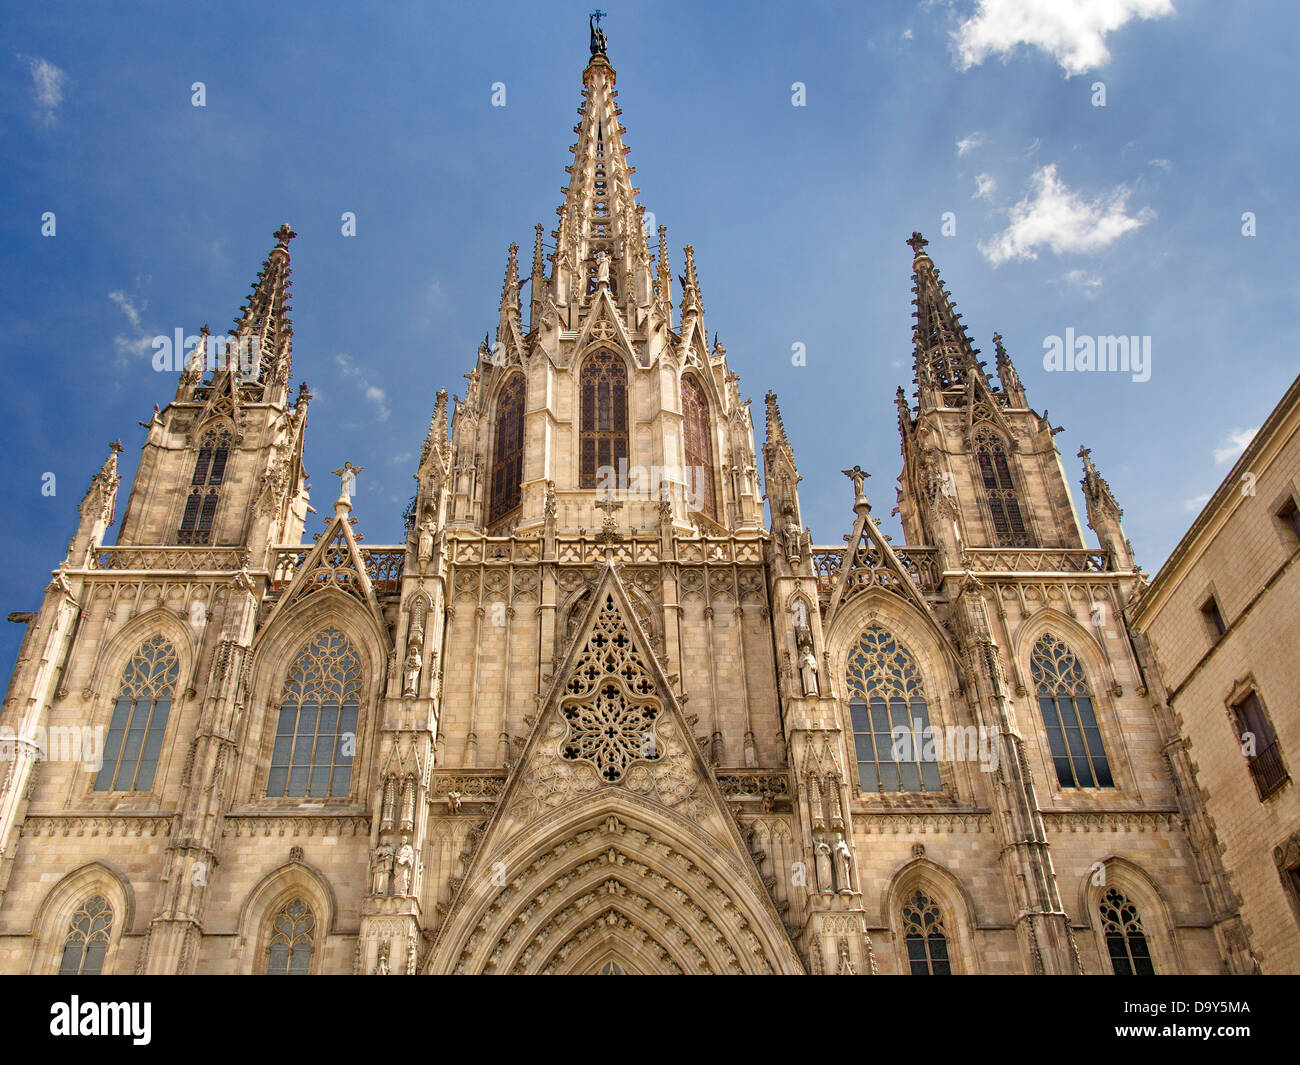 Imposing facade of the Santa Eulalia Cathedral in Barcelona's Gothic Quarter, Spain  2 Stock Photo